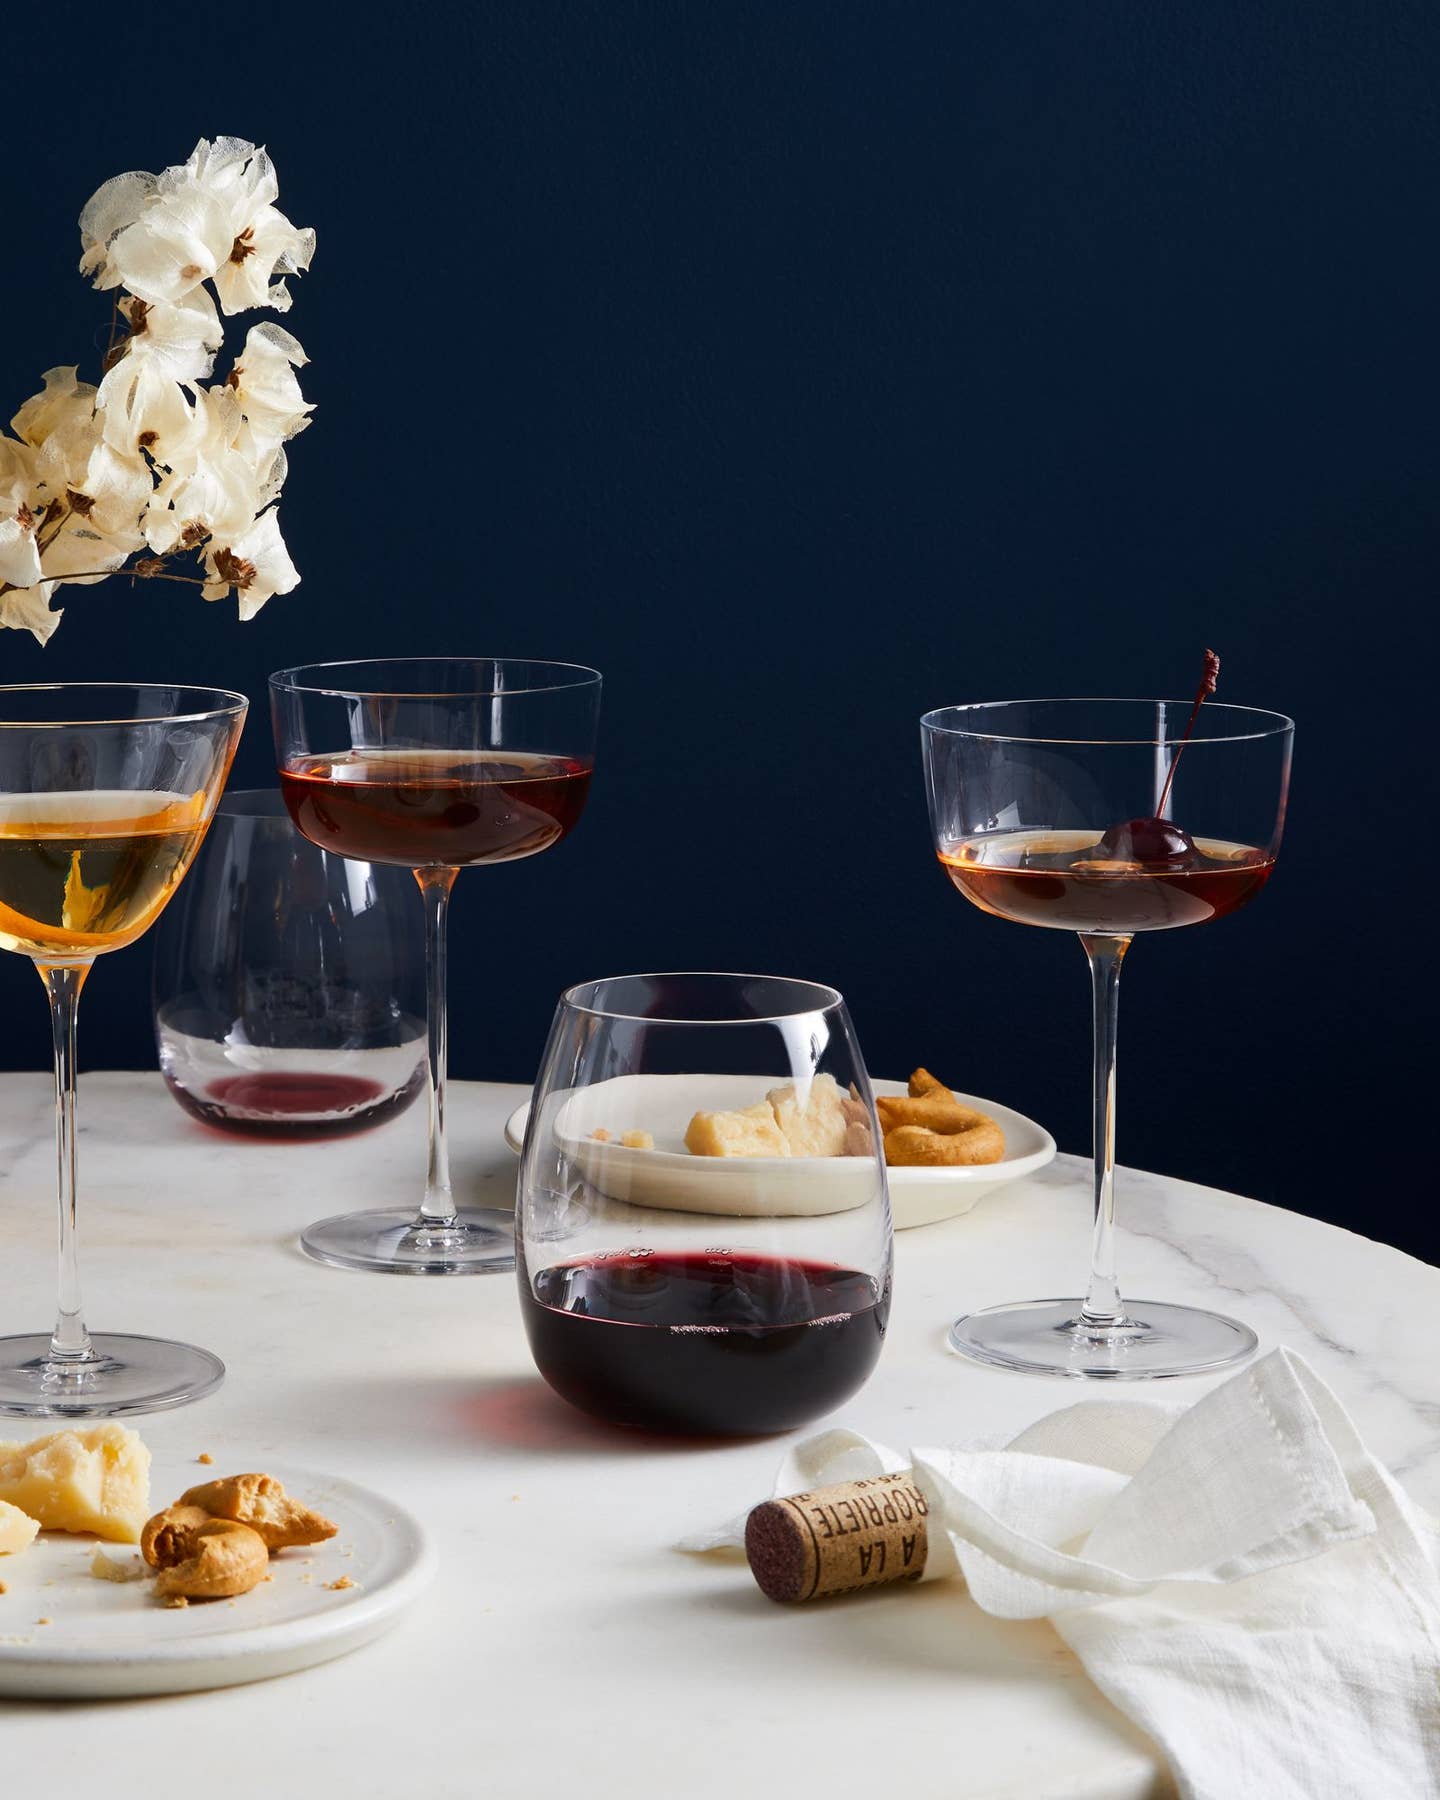 A Definitive Guide to the Best Wine Glasses, Based on Your Go-To Varietal